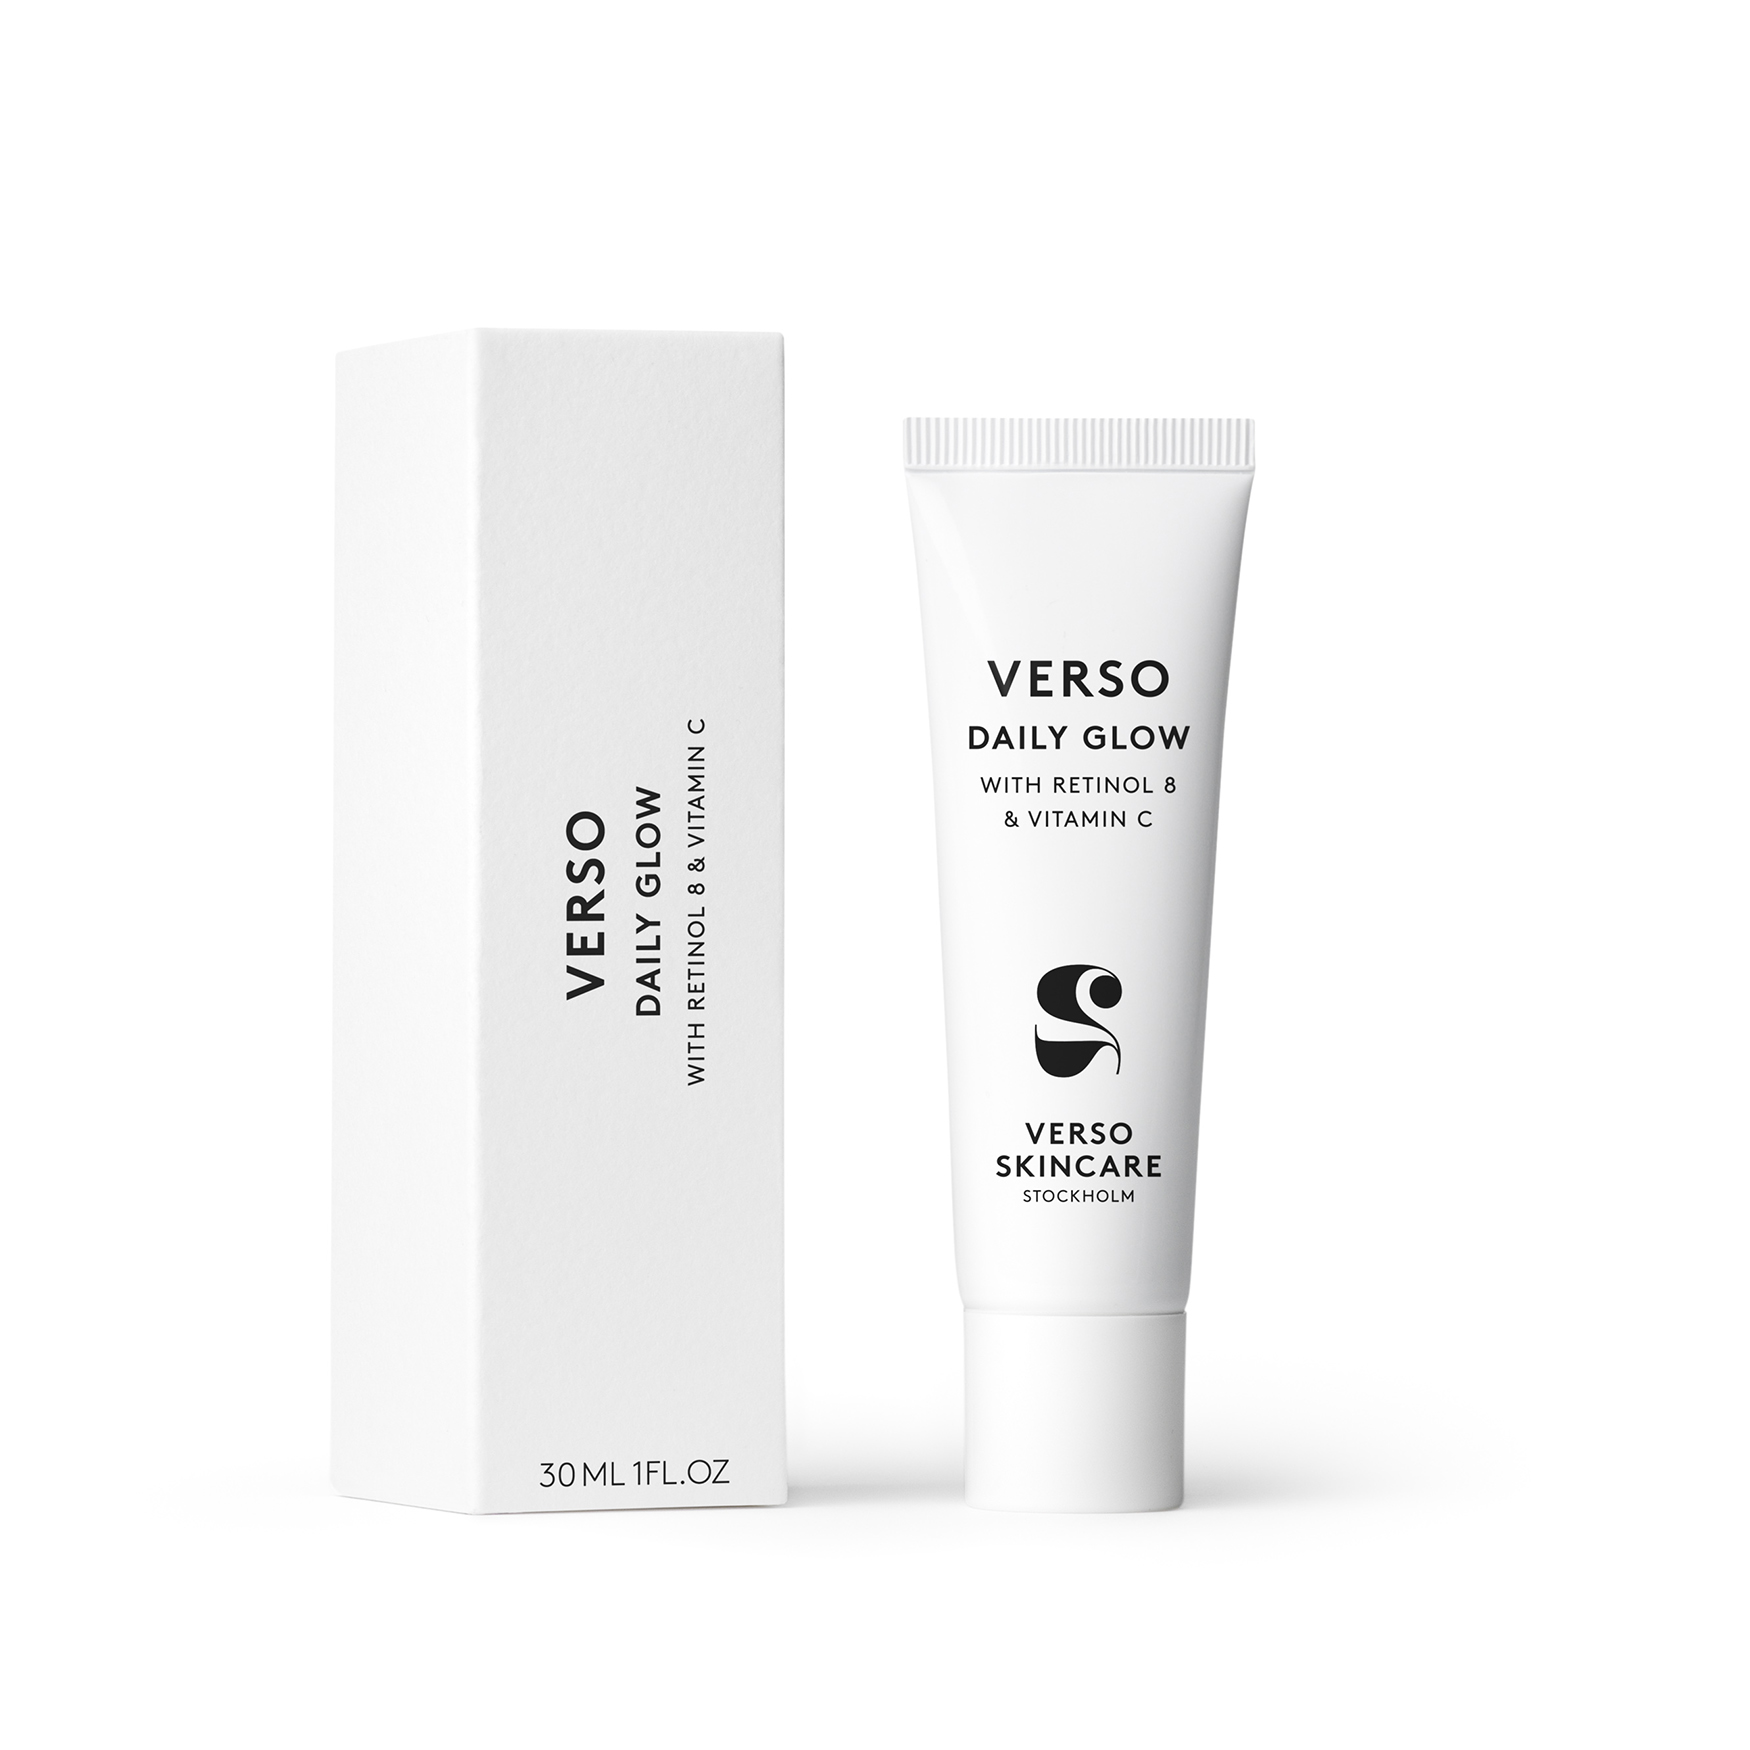 Verso Daily Glow | Space NK